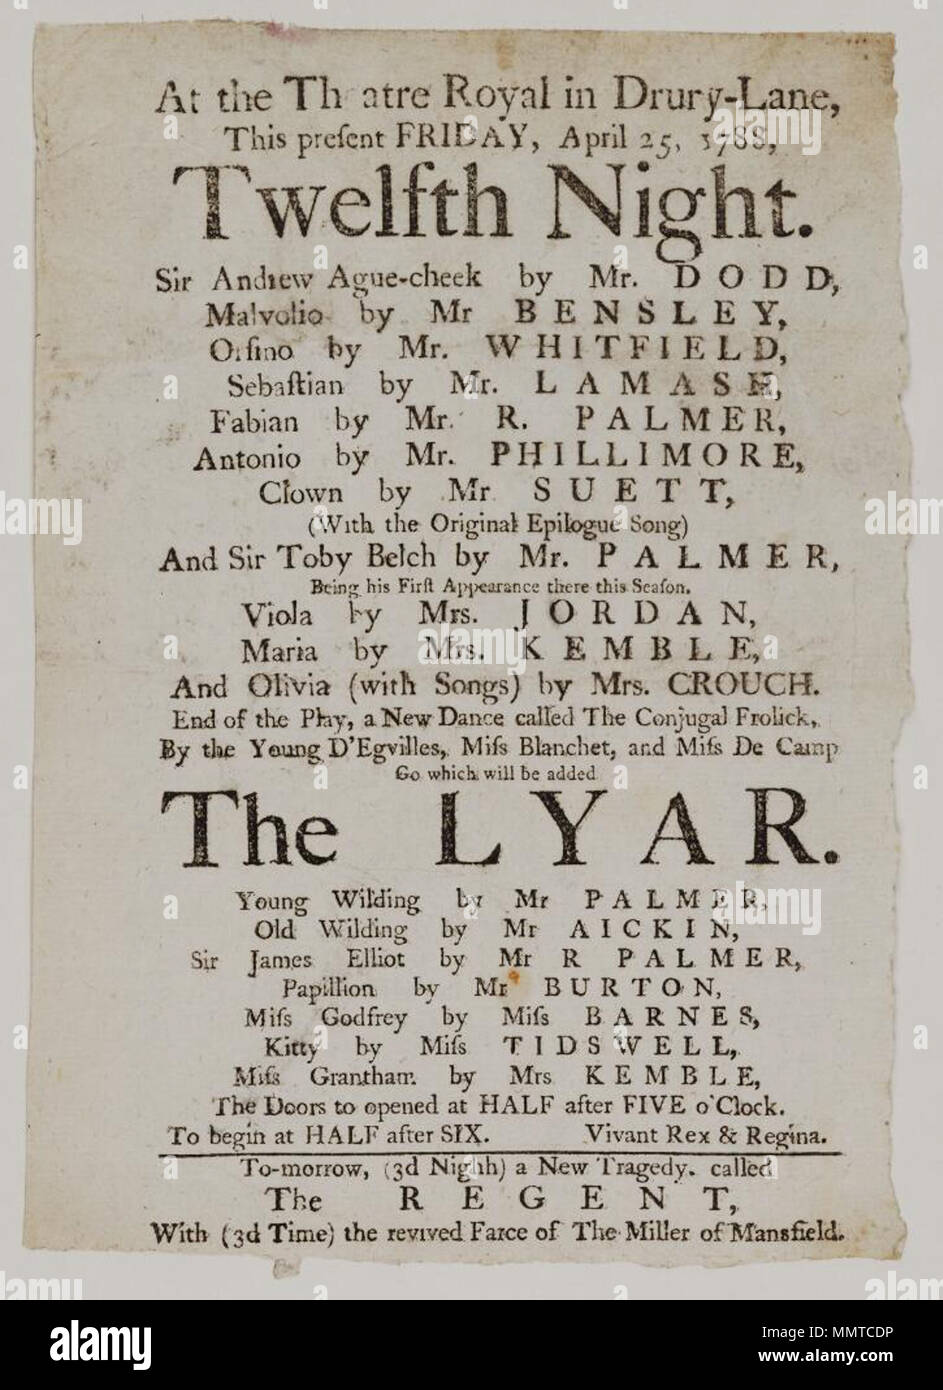 . Playbill of Drury Lane Theatre, Friday, April 25, 1788, announcing Twelfth night &c.; Twelfth night: 'with the original epilogue song'; Twelfth night; Conjugal frolick; Lyar; Regent; Miller of Mansfield; [Playbill of Drury Lane Theatre, Friday, April 25, 1788, announcing Twelfth night &c.]  [Playbill of Drury Lane Theatre, Friday, April 25, 1788, announcing Twelfth night &c.]. 25 April 1788. Drury Lane Theatre [author] Bodleian Libraries, Playbill of Drury Lane Theatre, Friday, April 25, 1788, announcing Twelfth night &amp;c. Stock Photo